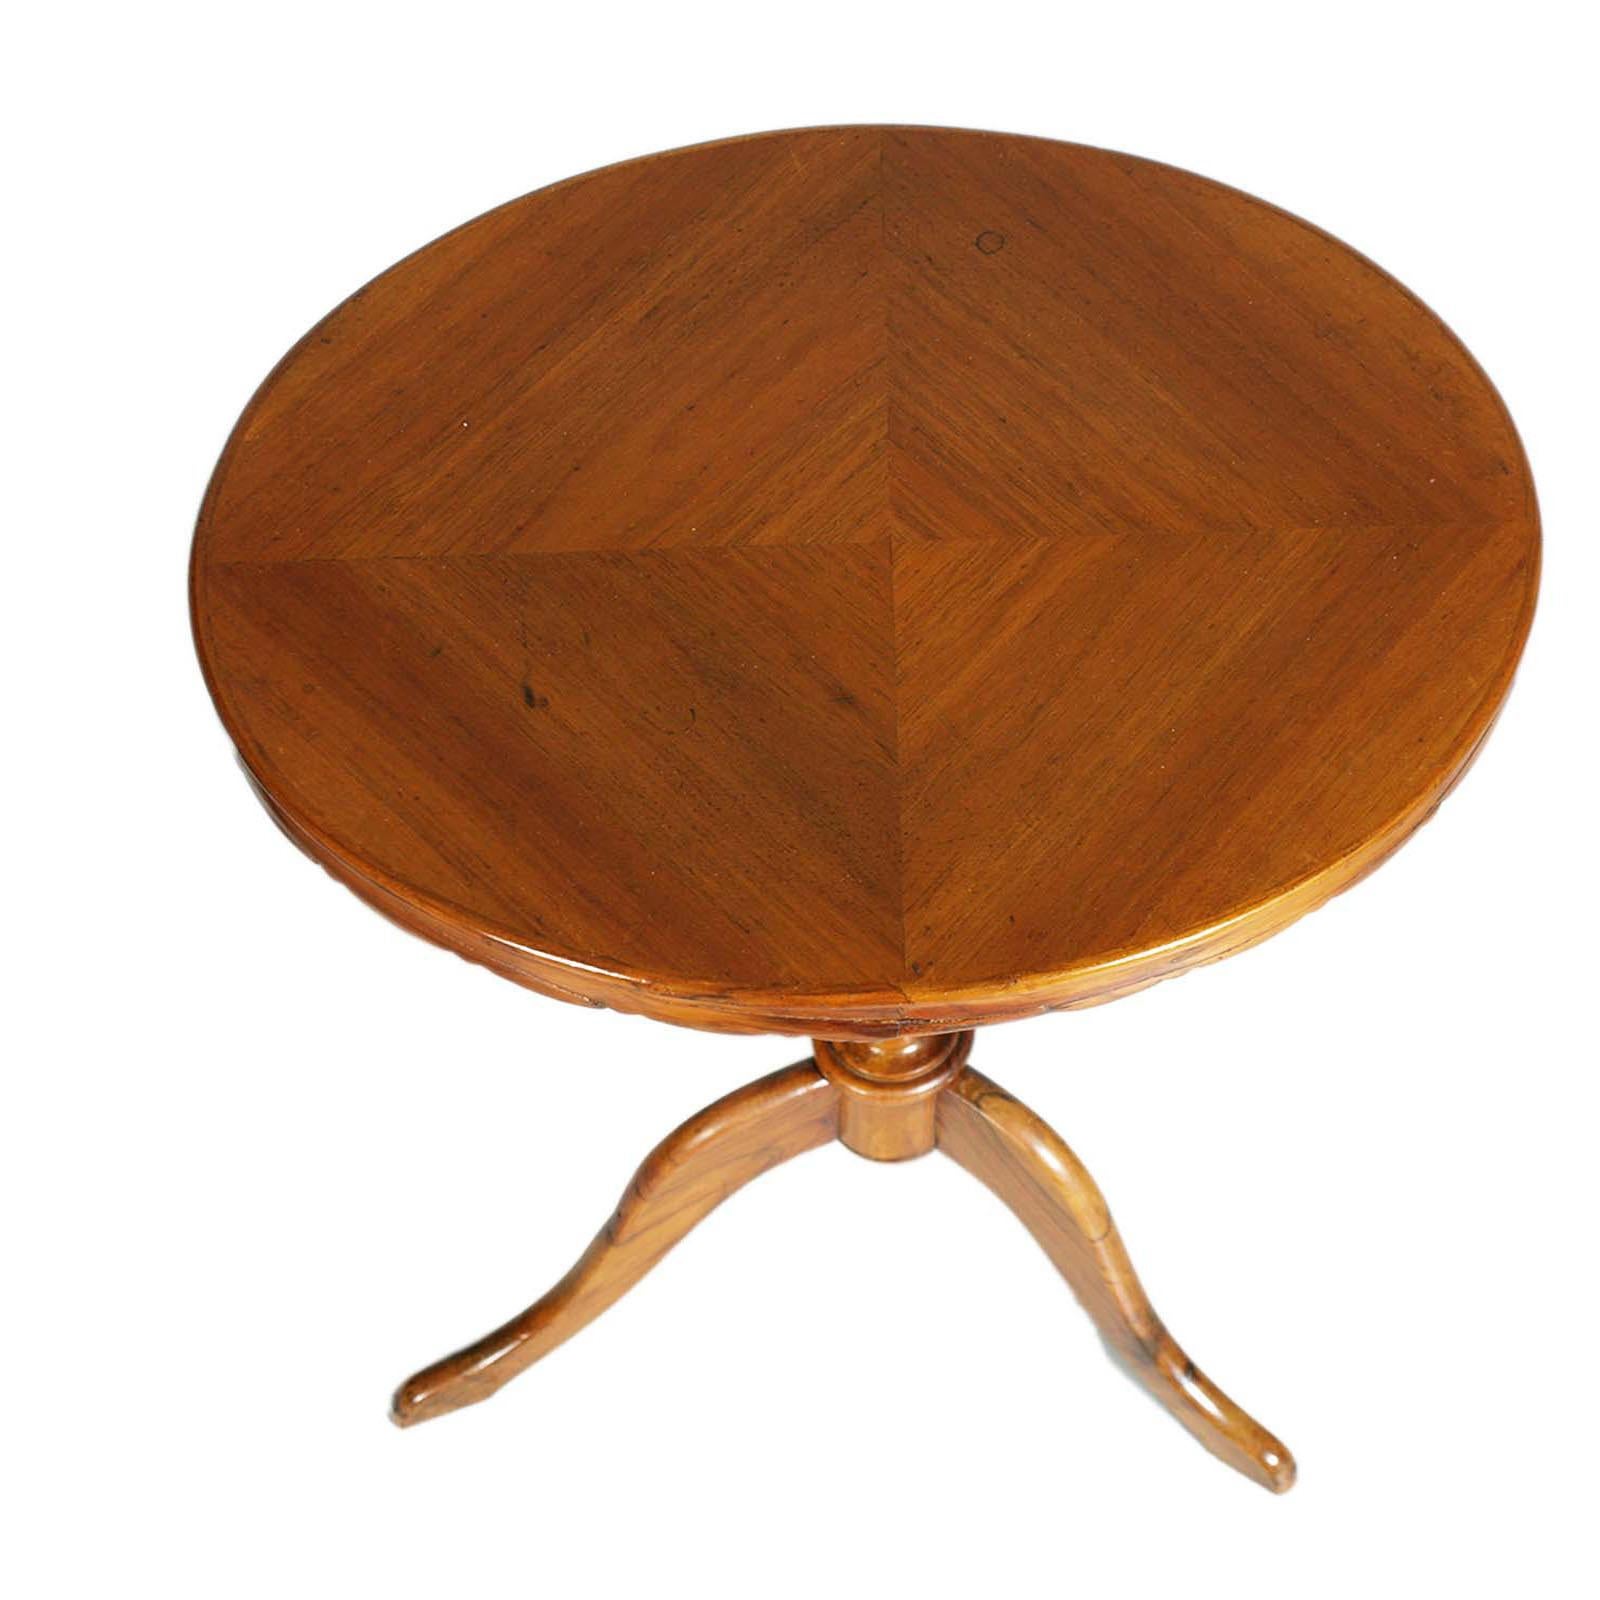 Hand-Carved 1920s Oval Tripod Neoclassical Coffee Table in Blond Walnut with Veneered Top For Sale